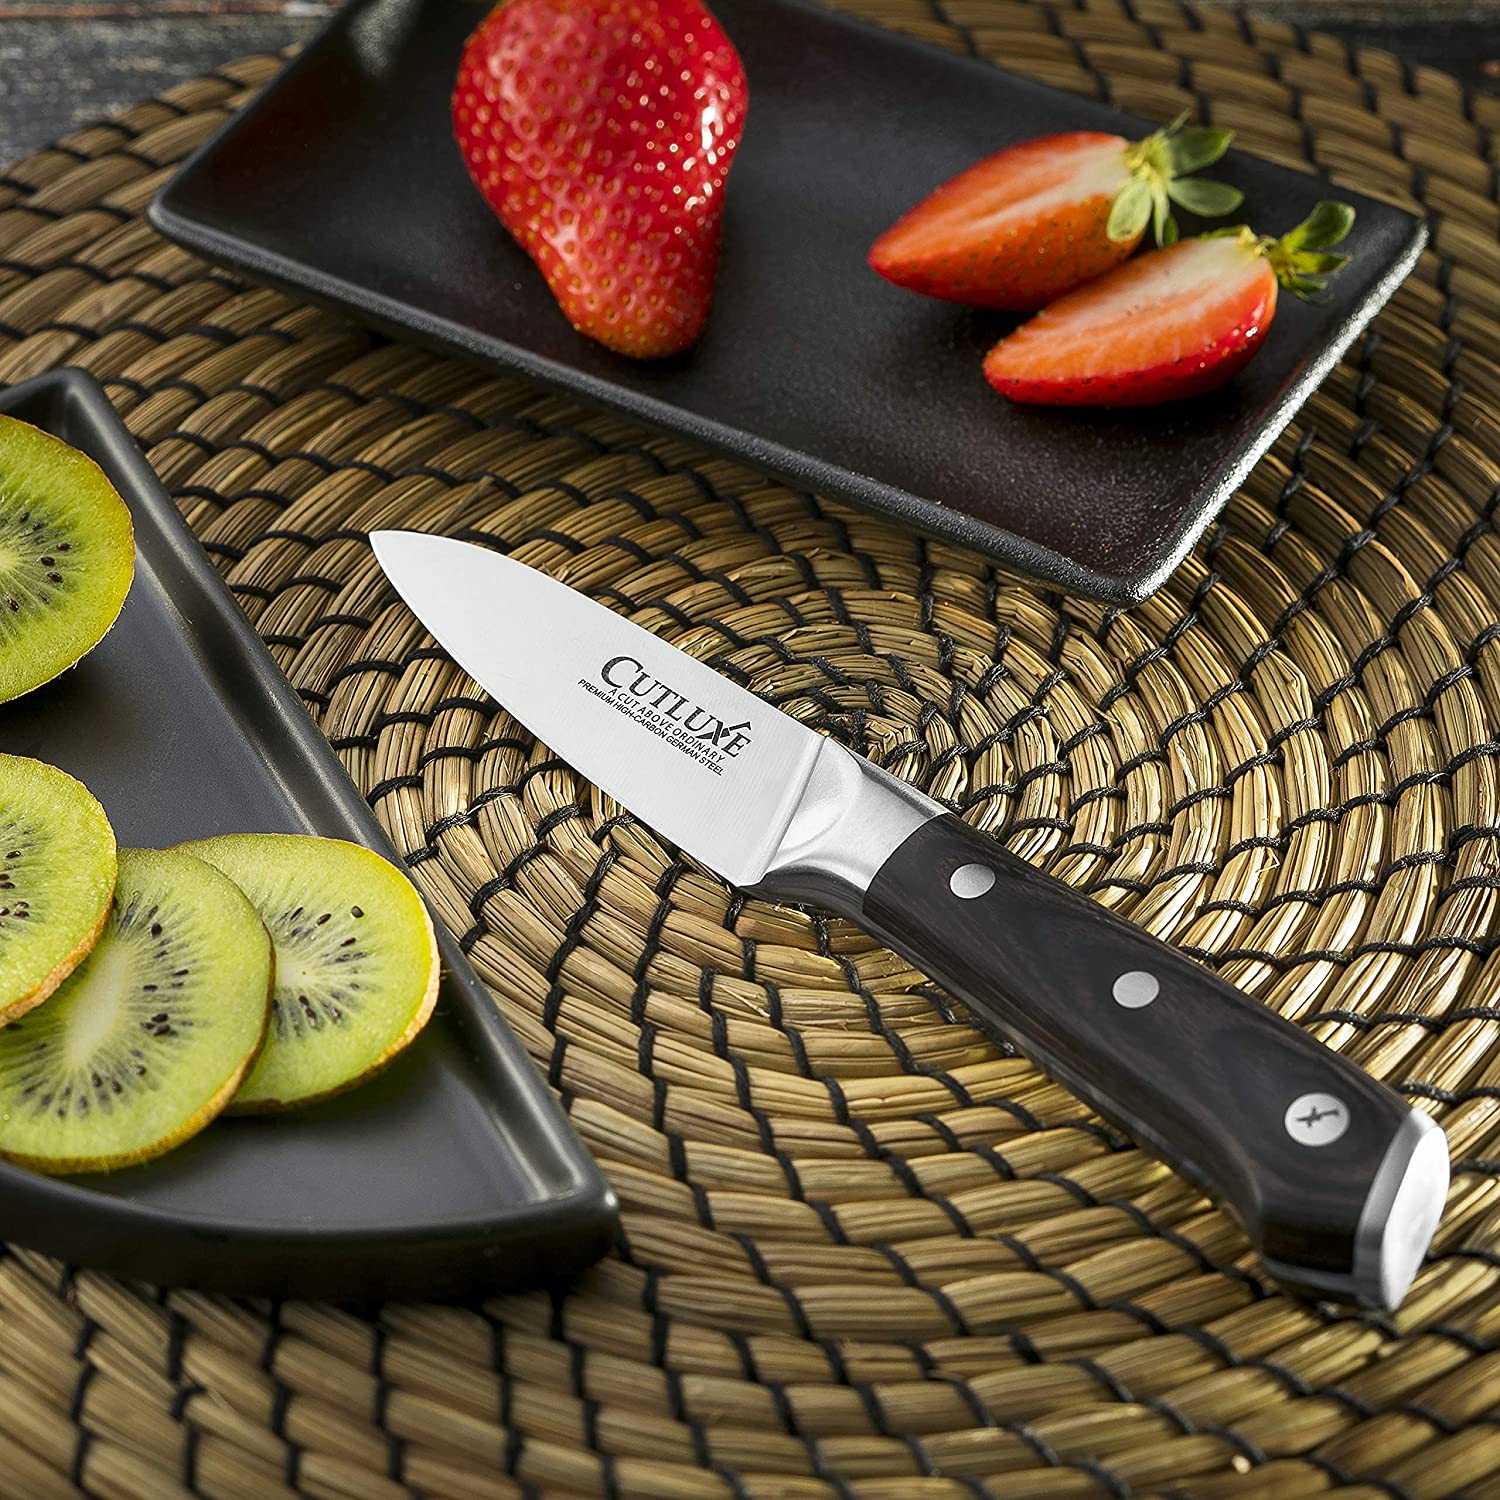 Kiwi Kitchen Knives, Set of 10, Chef's Knife, Stainless Steel